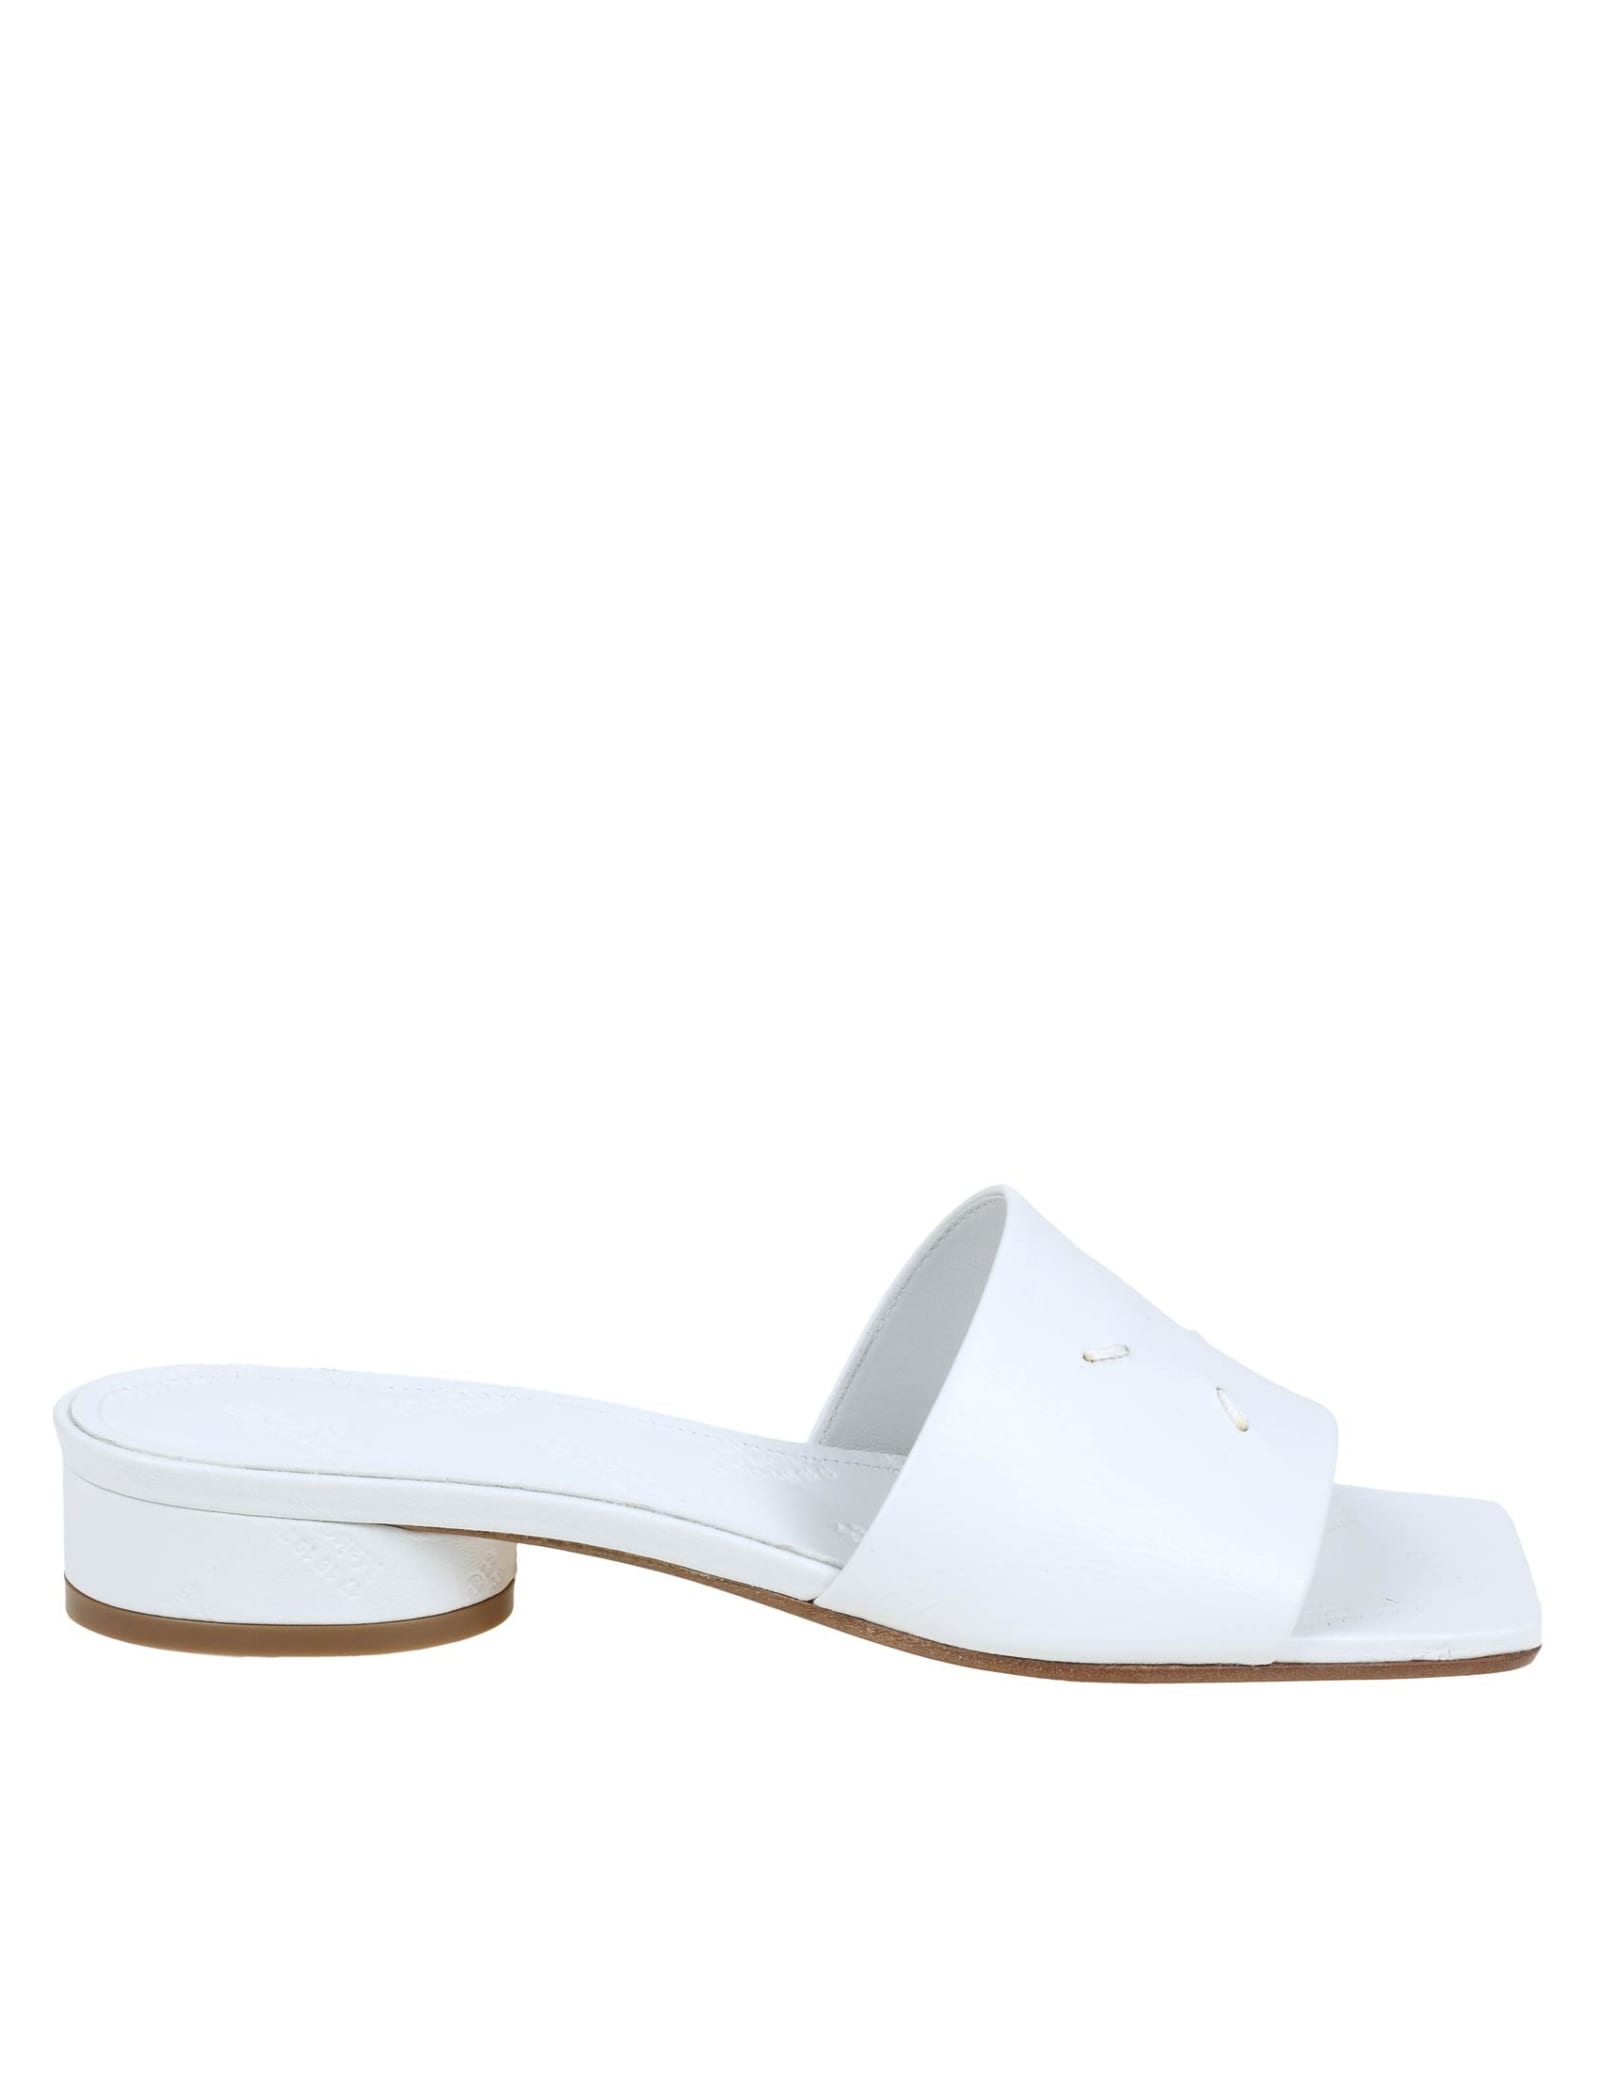 Maison Margiela Slippers With 4 White Seams